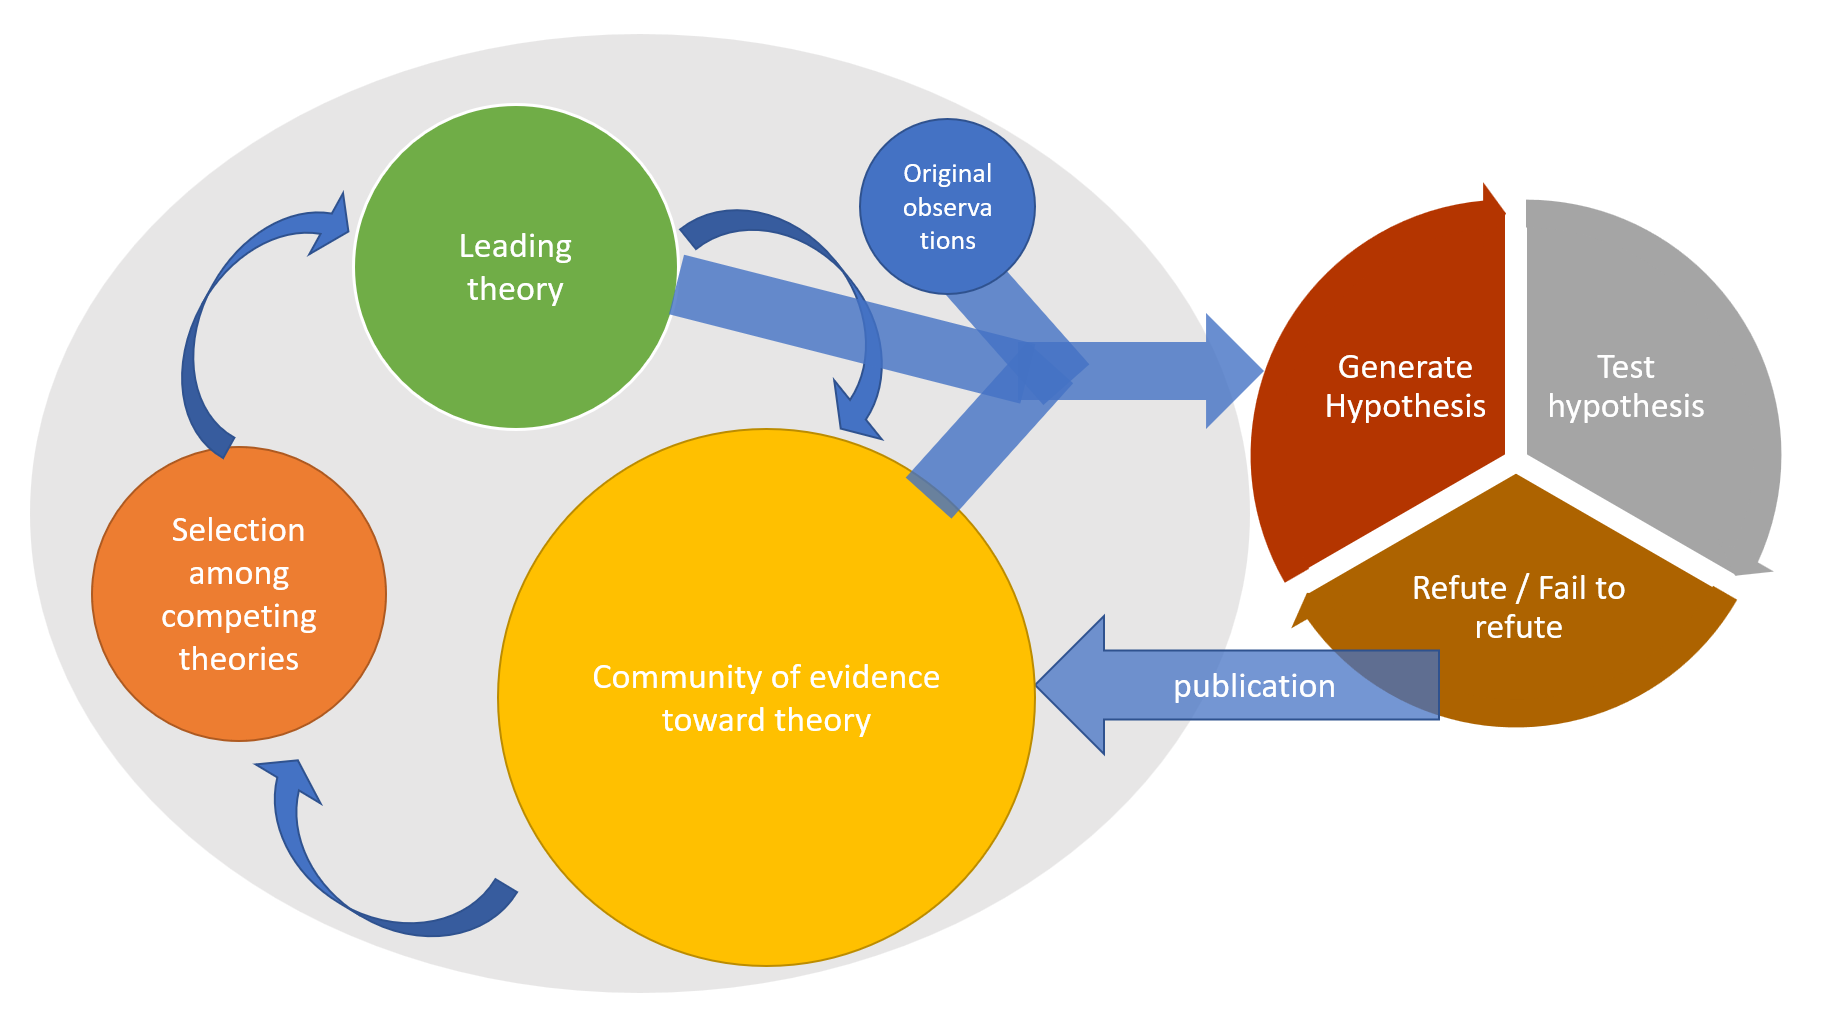 Hypotheses that you generate and test will join the community of evidence in the greater scientific community if published. When you publish chapters from your thesis, they enter into a community of knowledge (grey oval) held by the larger scientific community. This knowledge can be used to support or refute theories. The feedback from this larger body of evidence should come back into helping you generate more hypotheses for your own work.